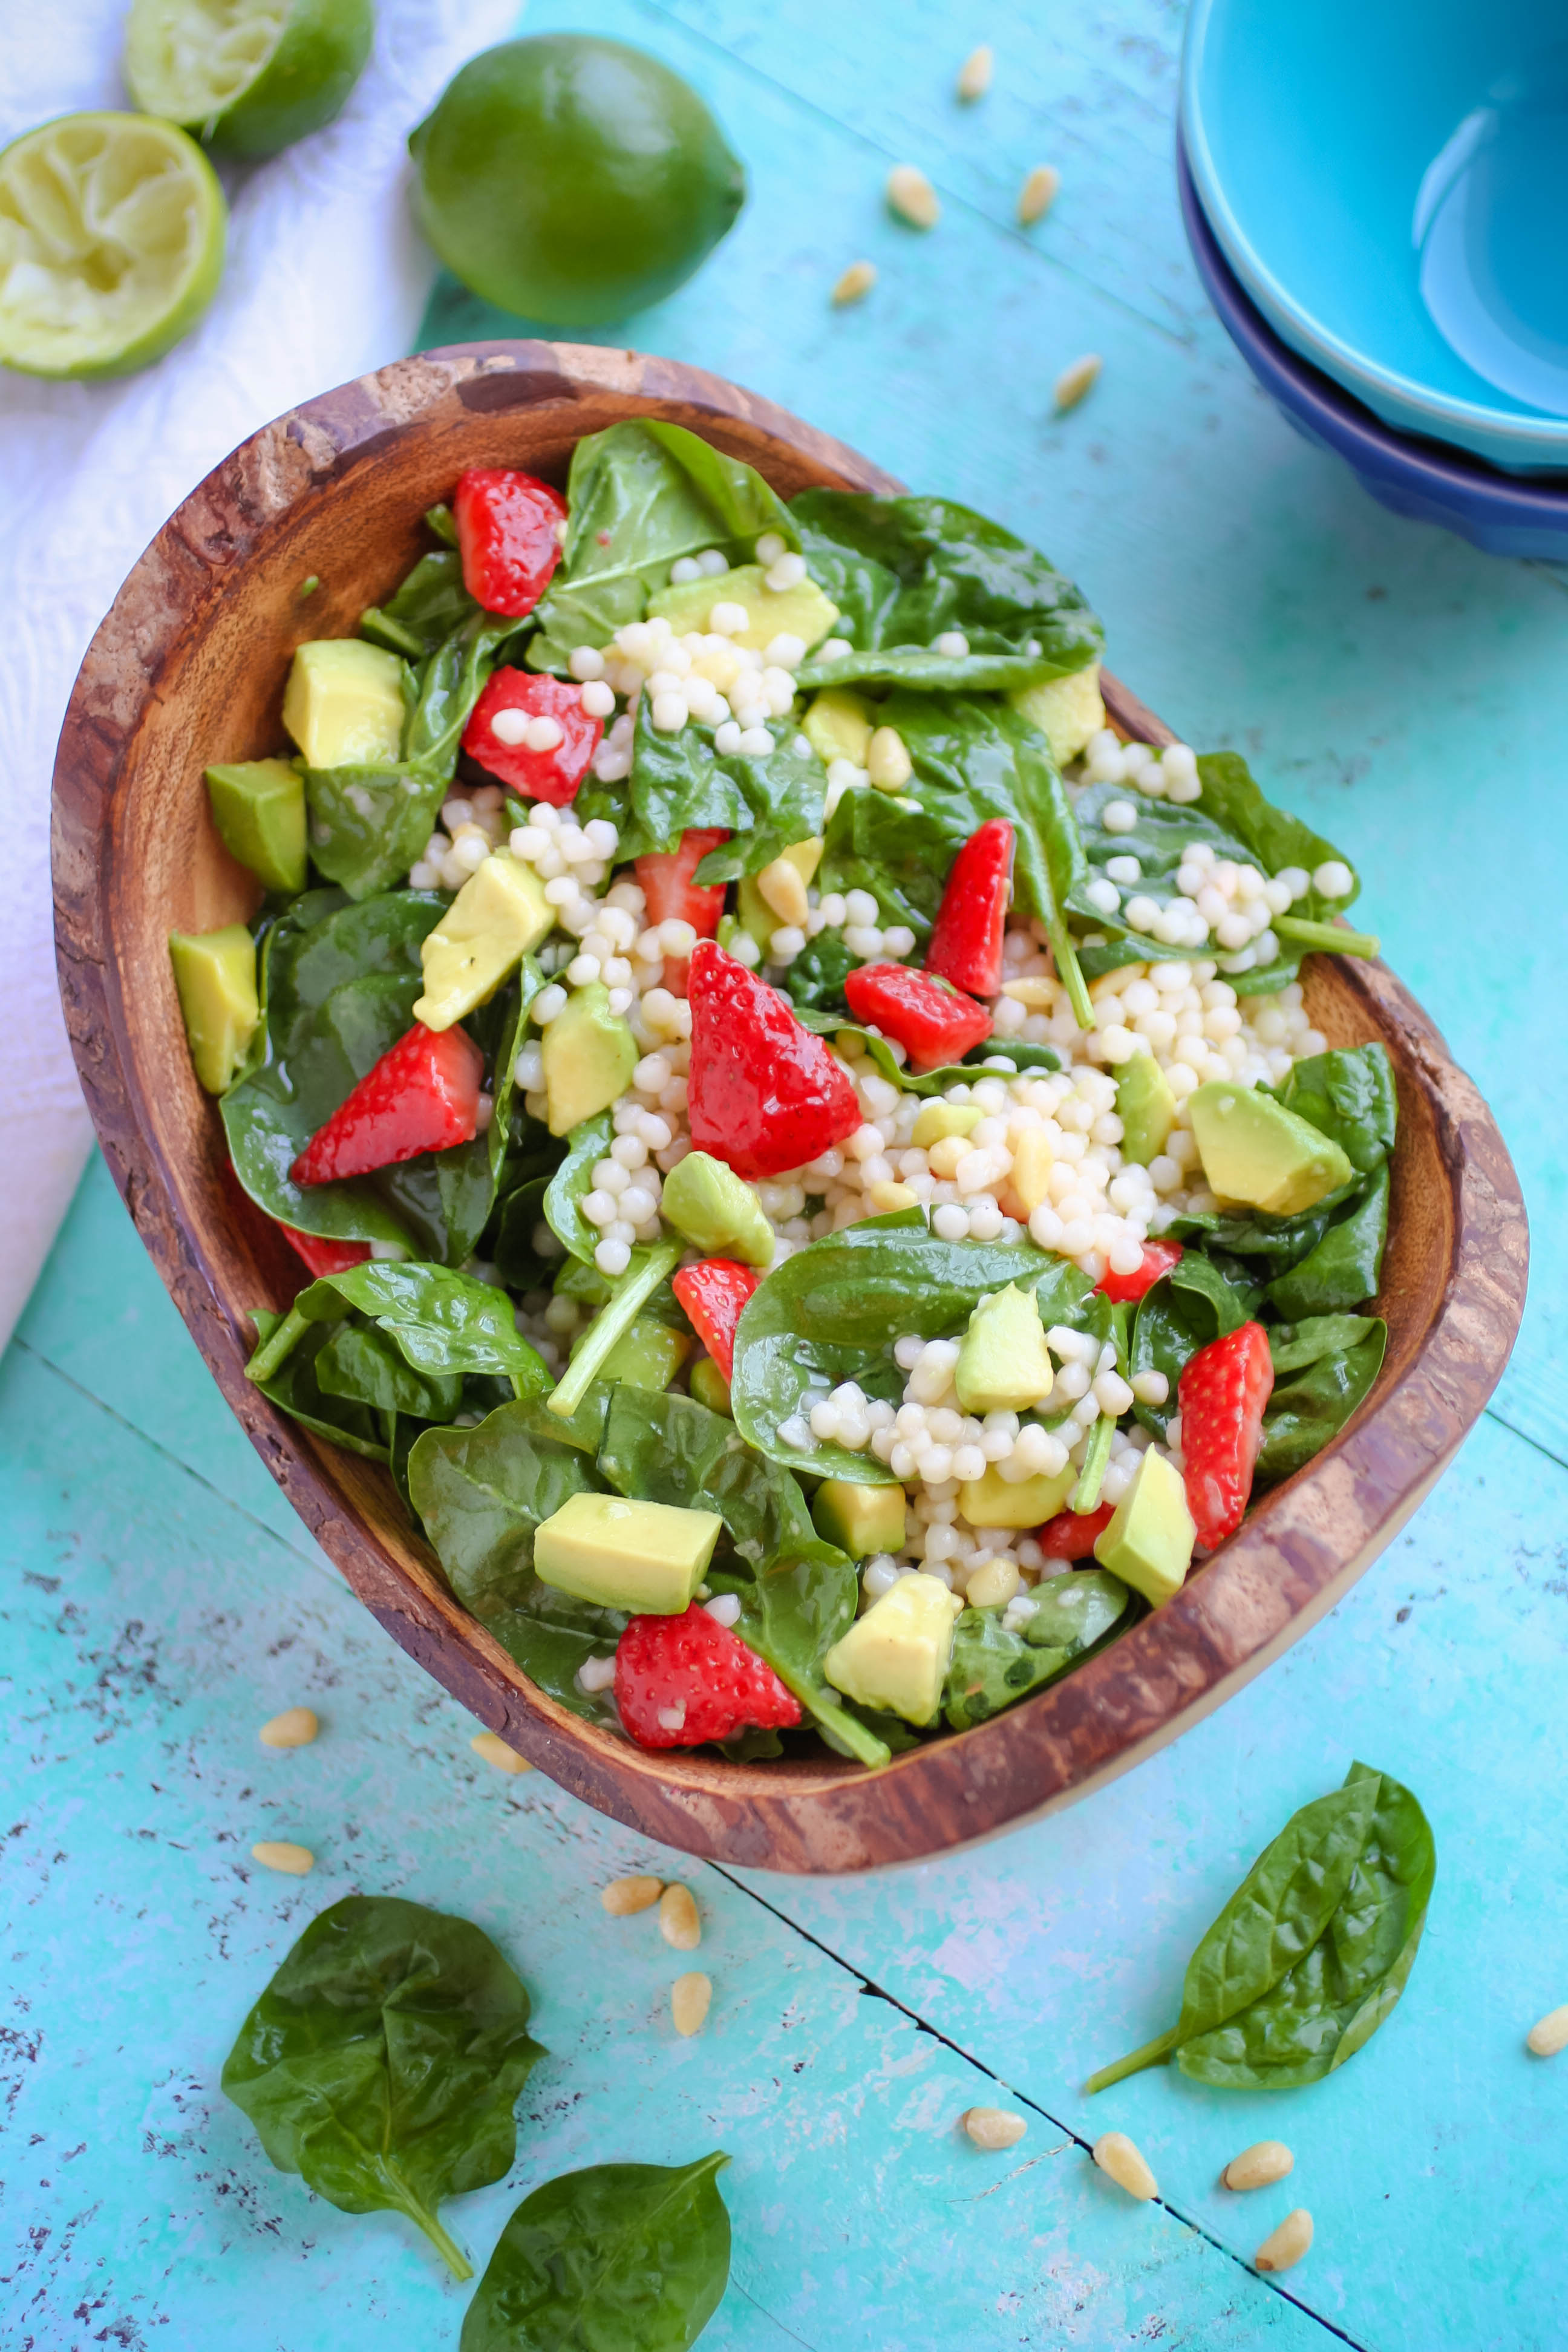 Spinach and Couscous Salad with Strawberries, Avocado & Honey-Lime Dressing is a fabulous salad for the summer. Spinach and Couscous Salad with Strawberries, Avocado & Honey-Lime Dressing is what you need to make for a great light meal.